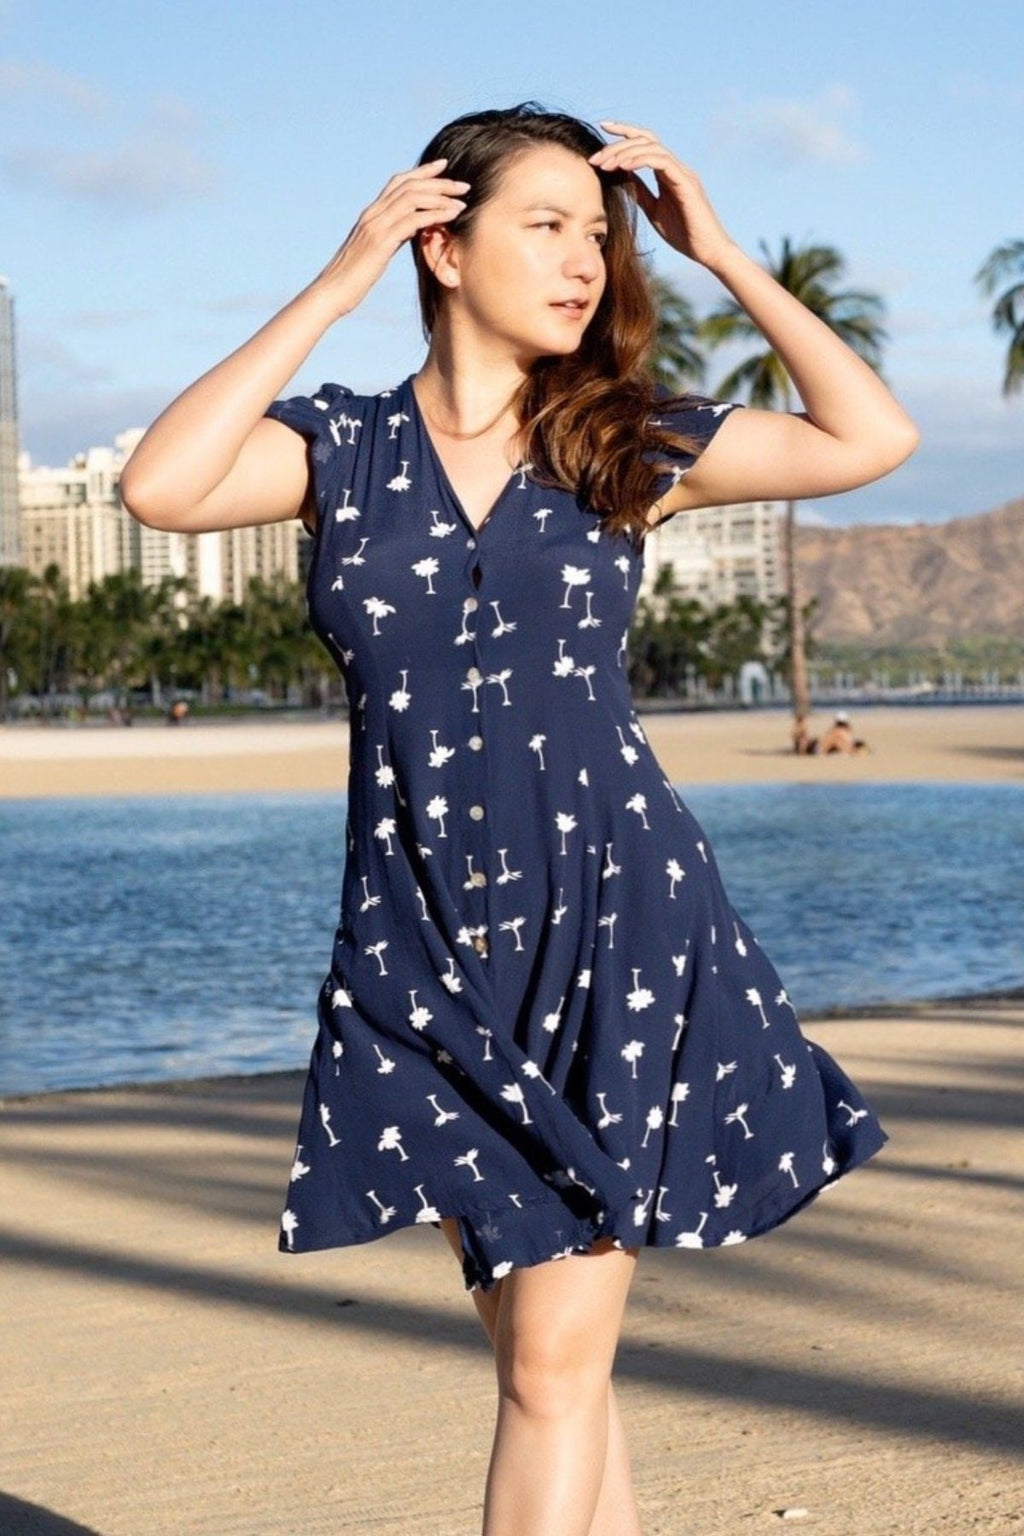 The Niu Hawaiian Dress is a flattering button-down short-sleeve dress that will look great any place you go.      Available in navy and pink, this Niu Hawaiian Dress is a must-have for any wardrobe. 